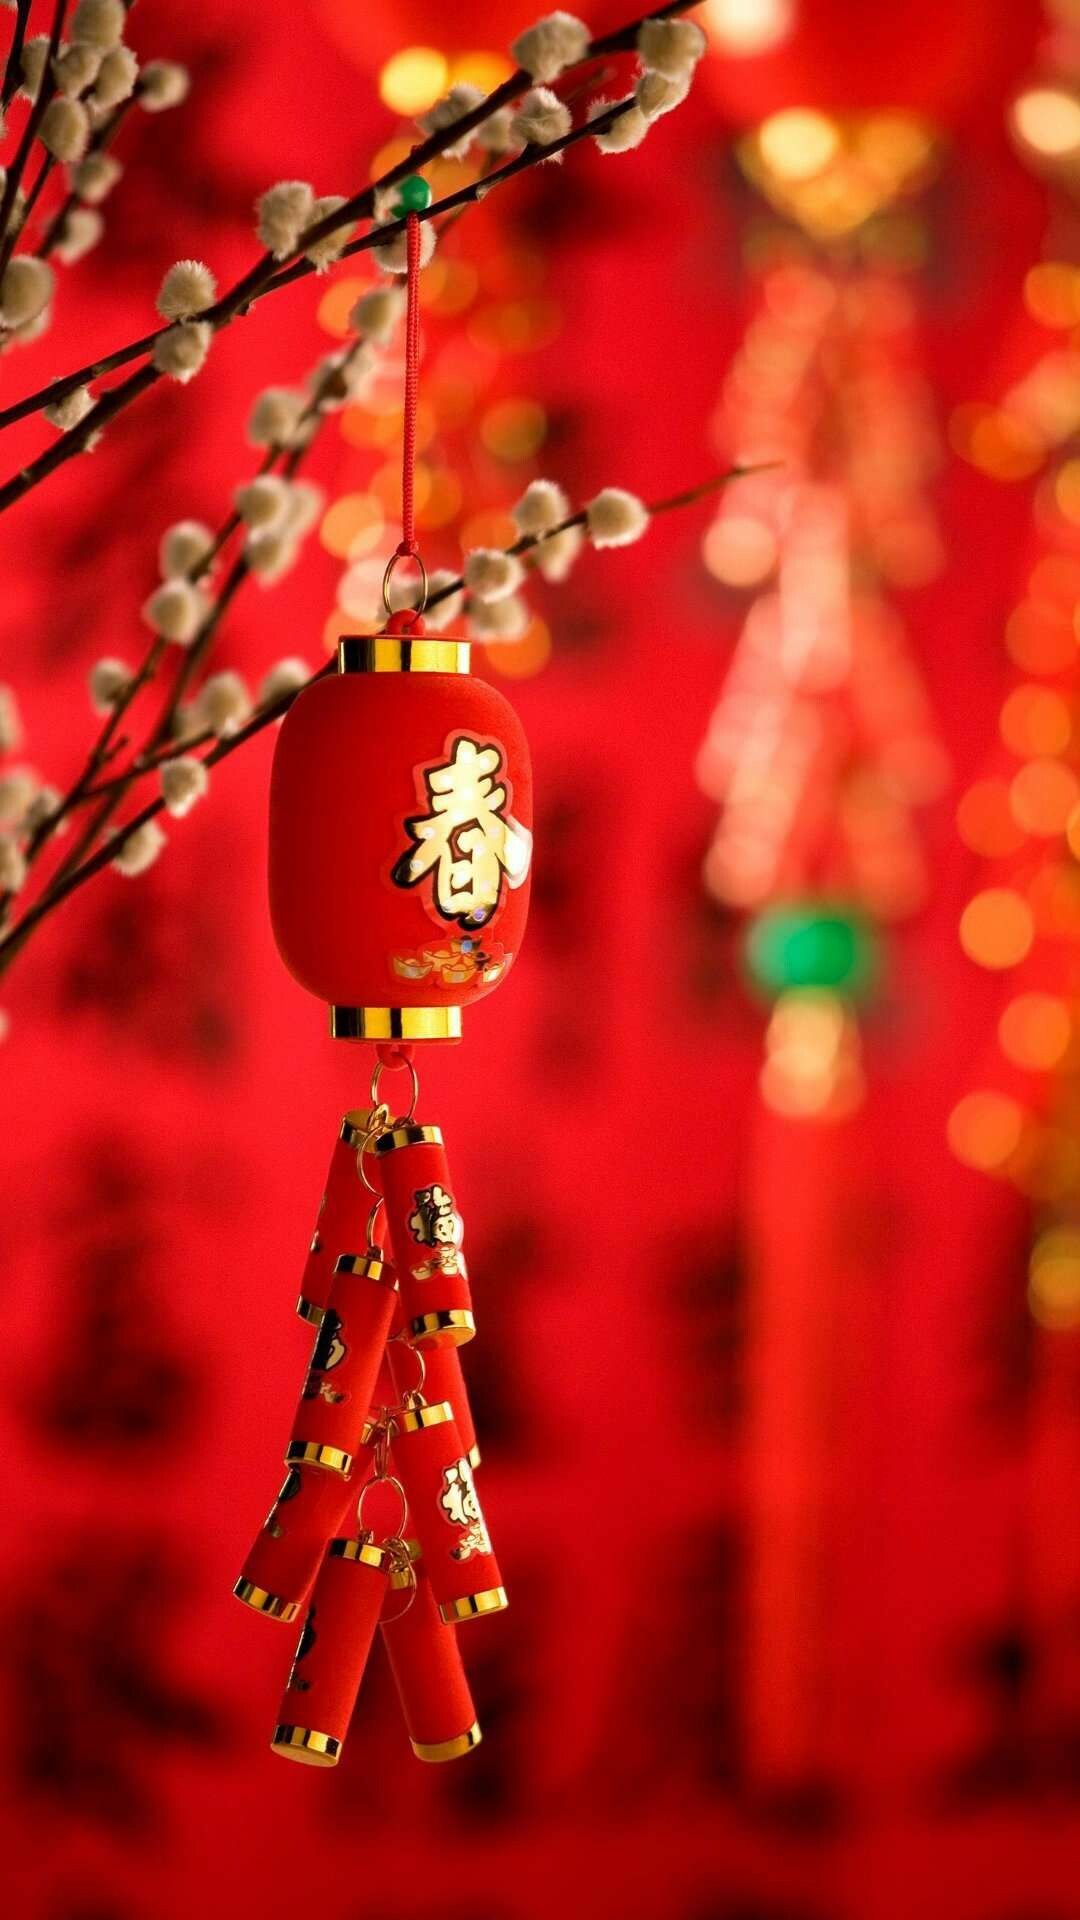 Chinese New Year: Firecrackers are using to scare off evil spirits during the festival. 1080x1920 Full HD Wallpaper.